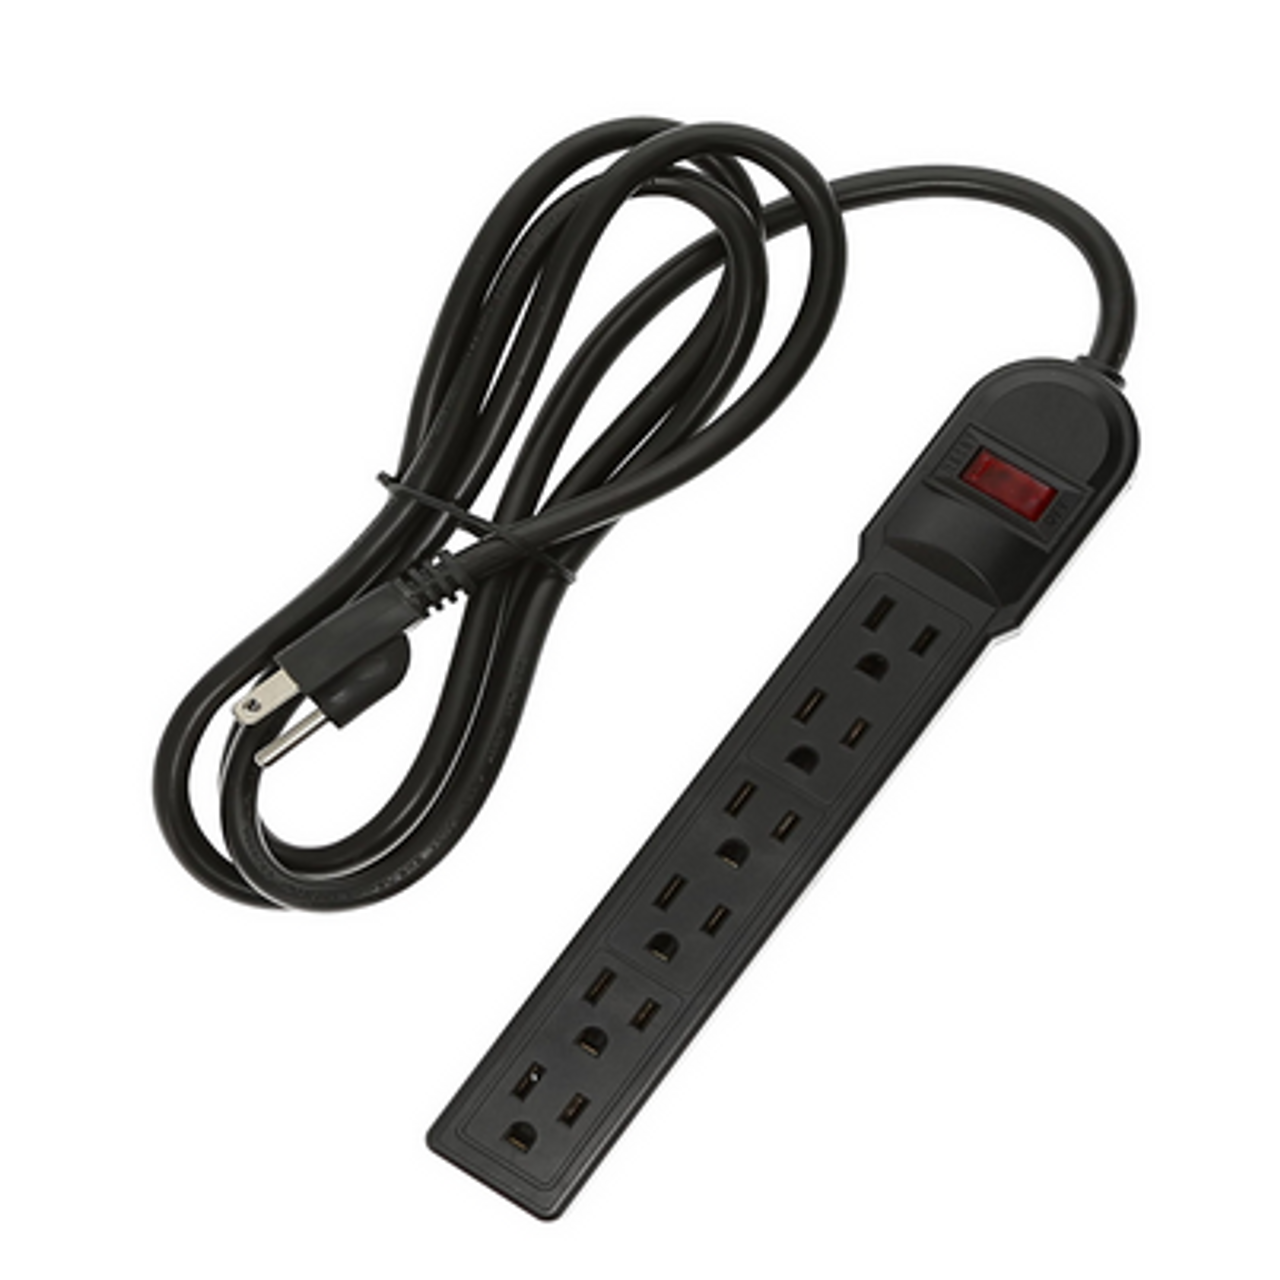 6 Outlet Perpendicular Type Power Strip with 12 ft. Cord, Black